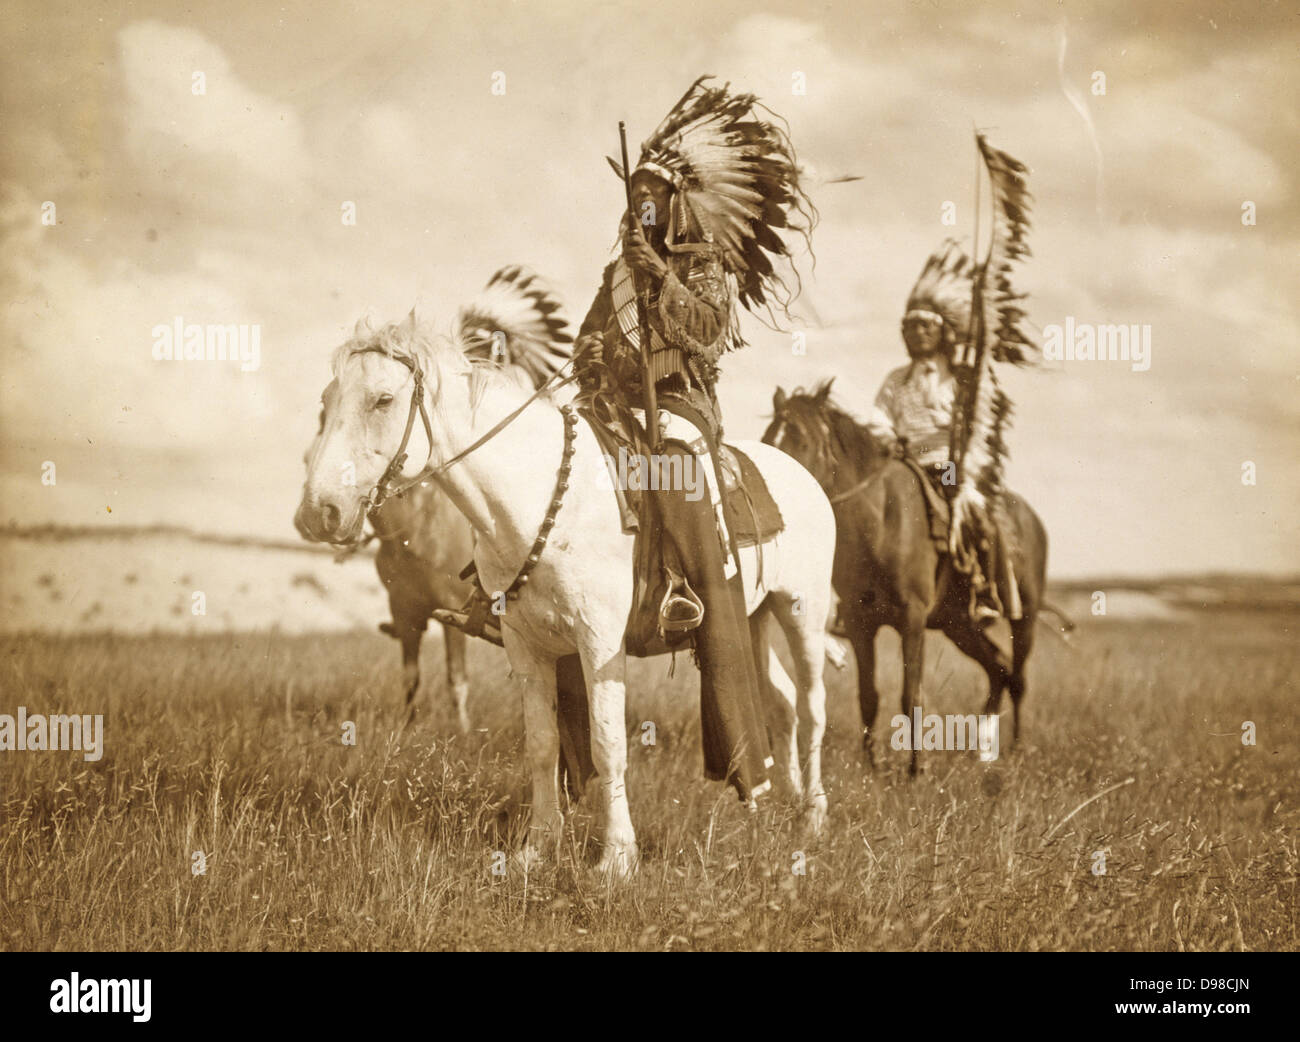 Three Native American chiefs mounted on horses and wearing feather headdresses. Photograph c1890. Stock Photo